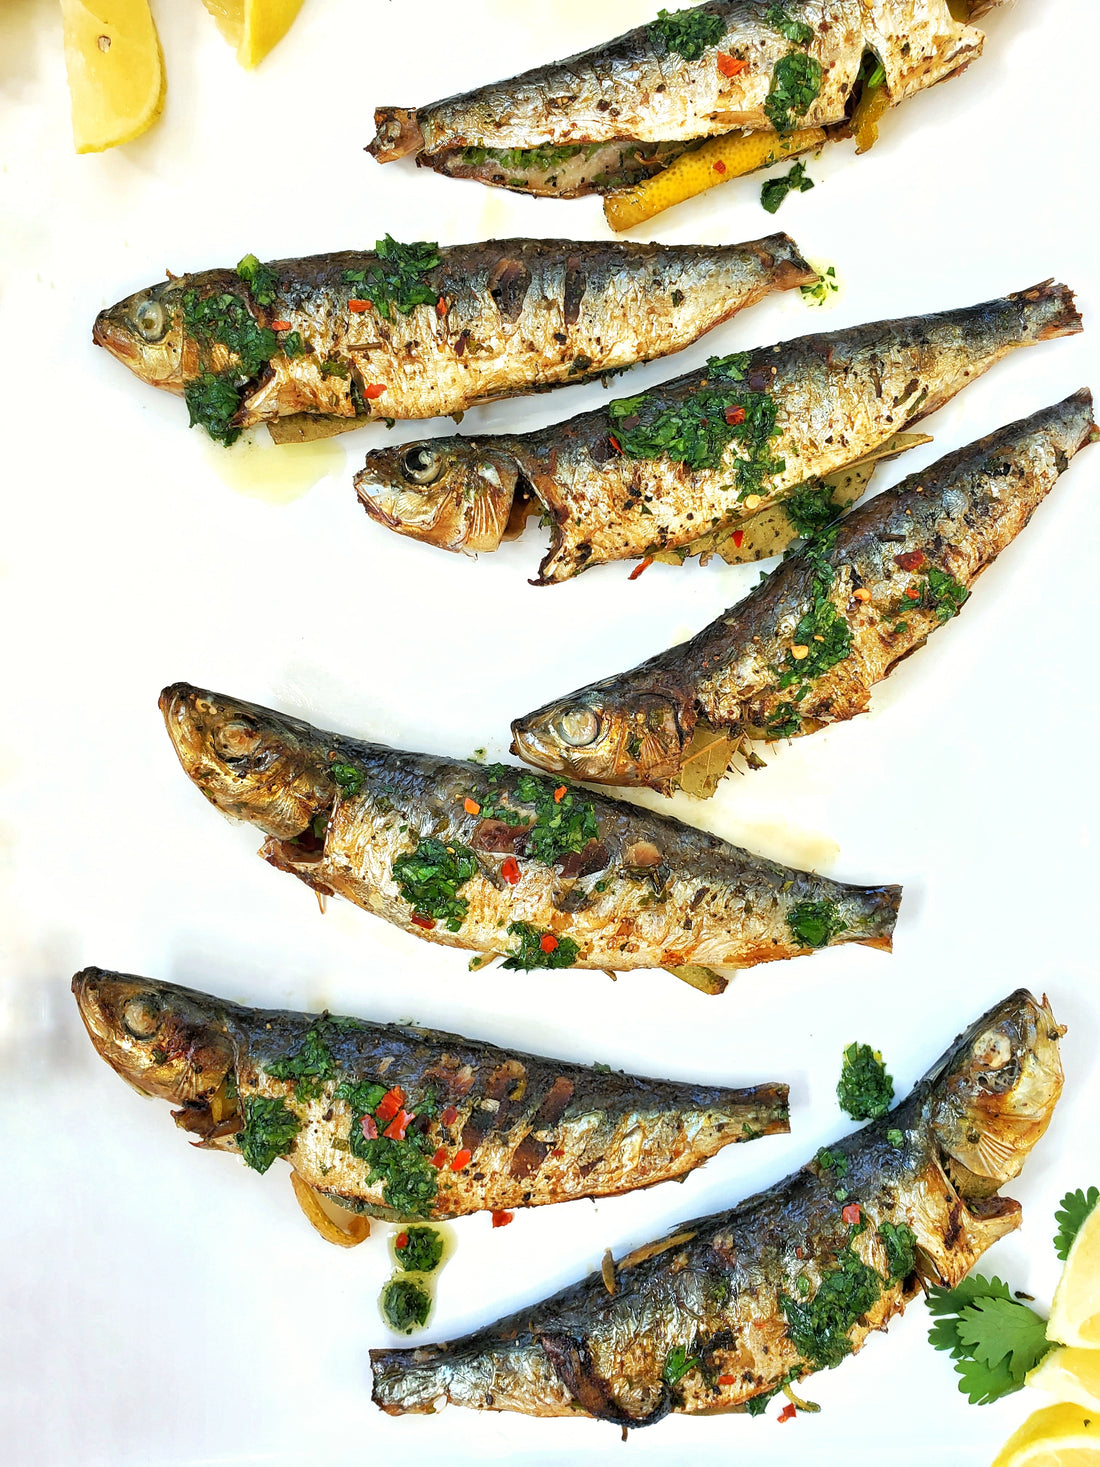 Tasty Grilled (Broiled) Portuguese Sardines